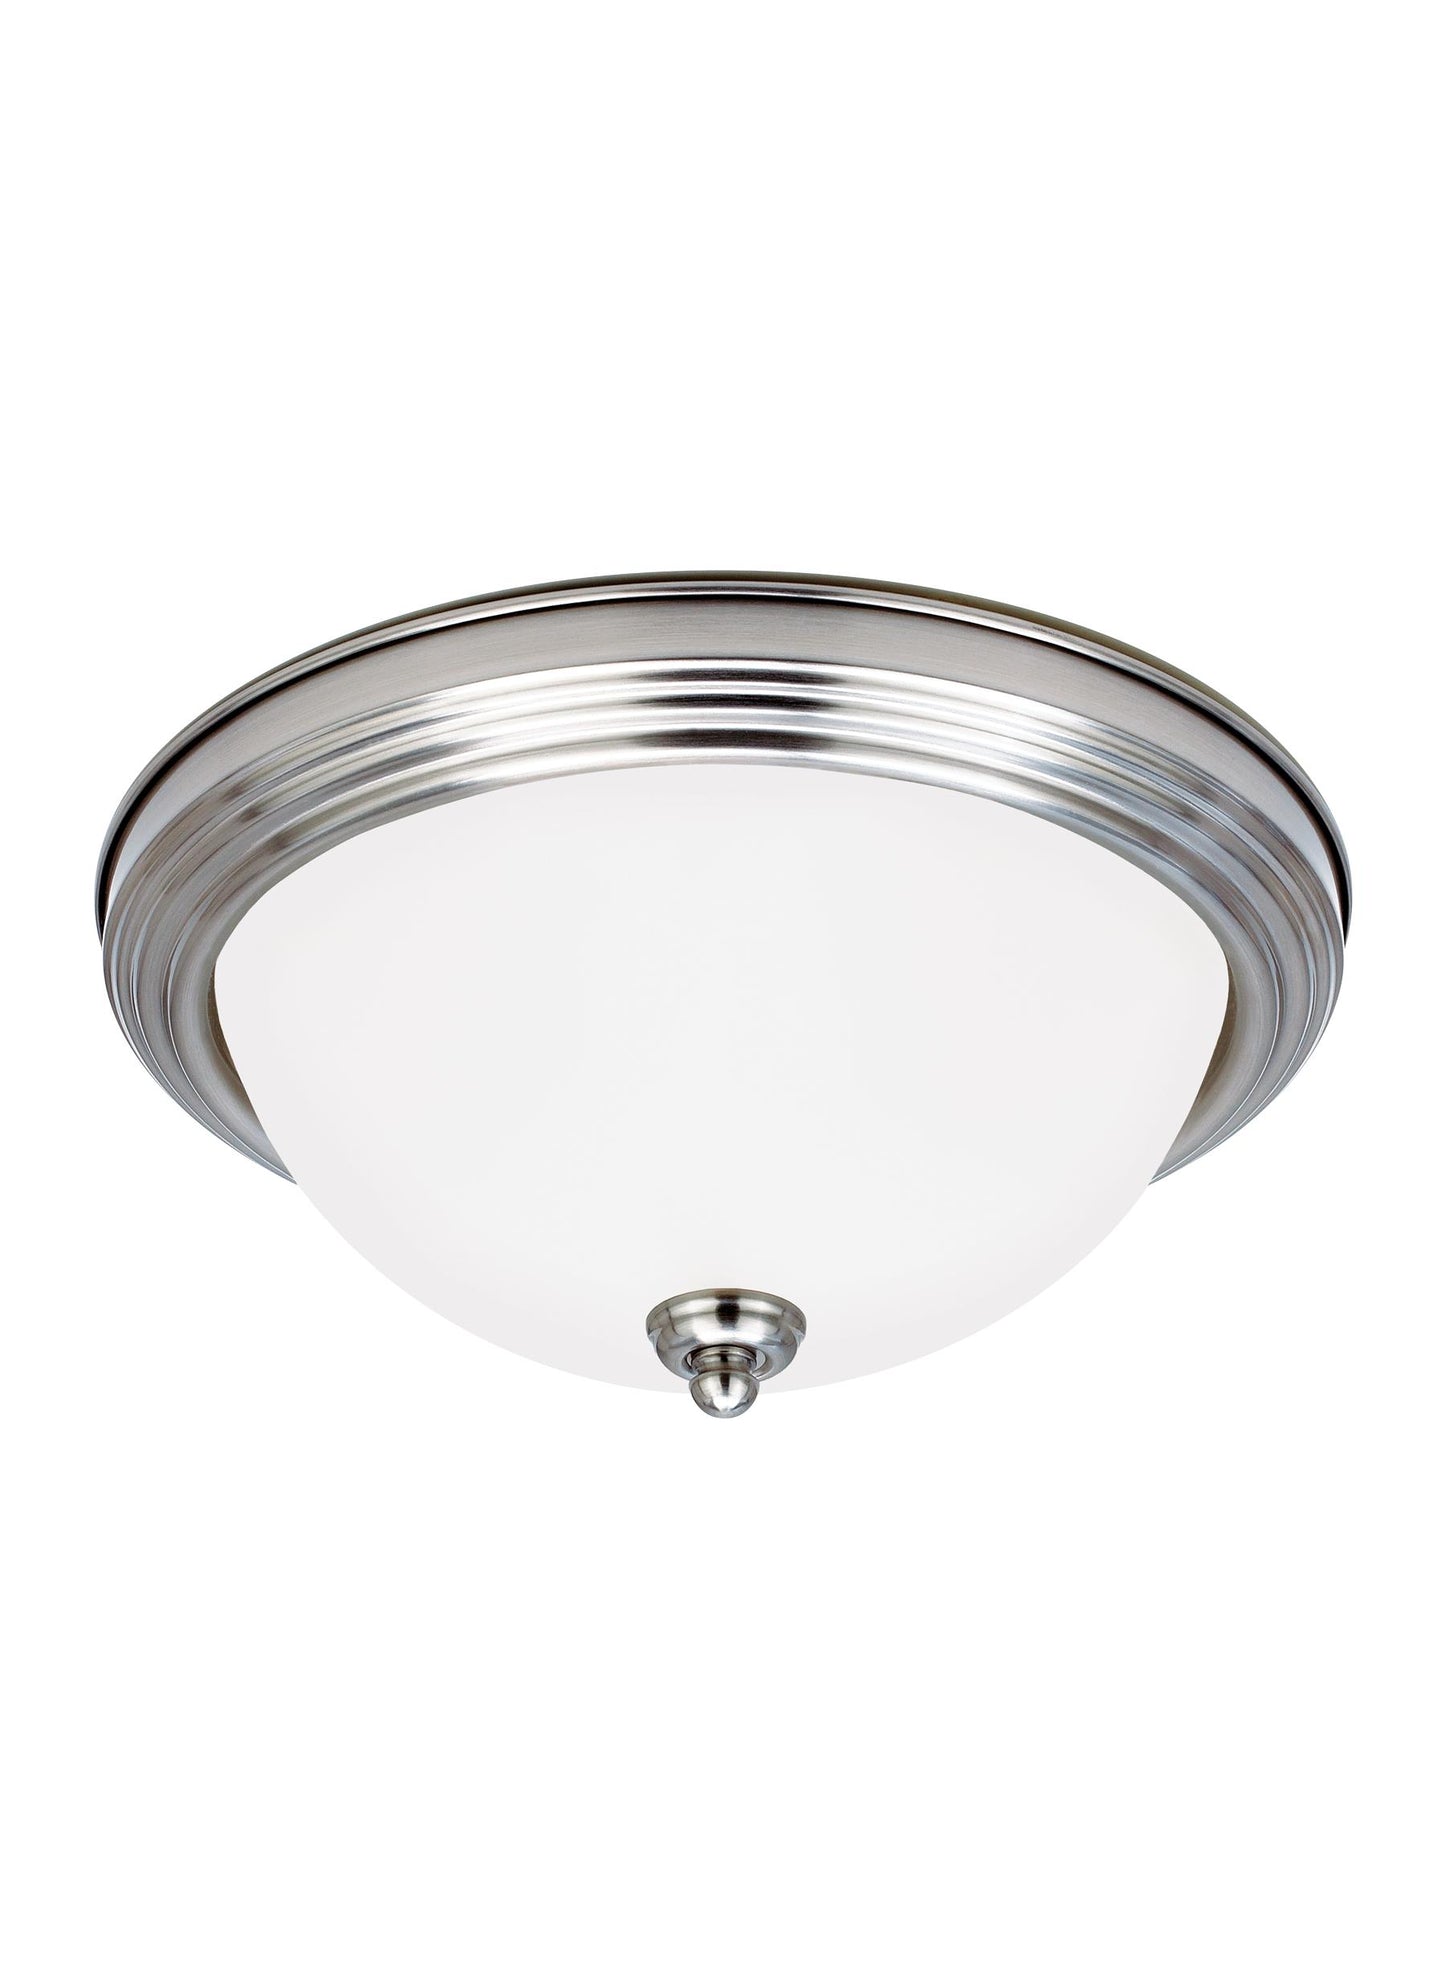 Geary transitional 2-light indoor dimmable ceiling flush mount fixture in brushed nickel silver finish with satin etched g...